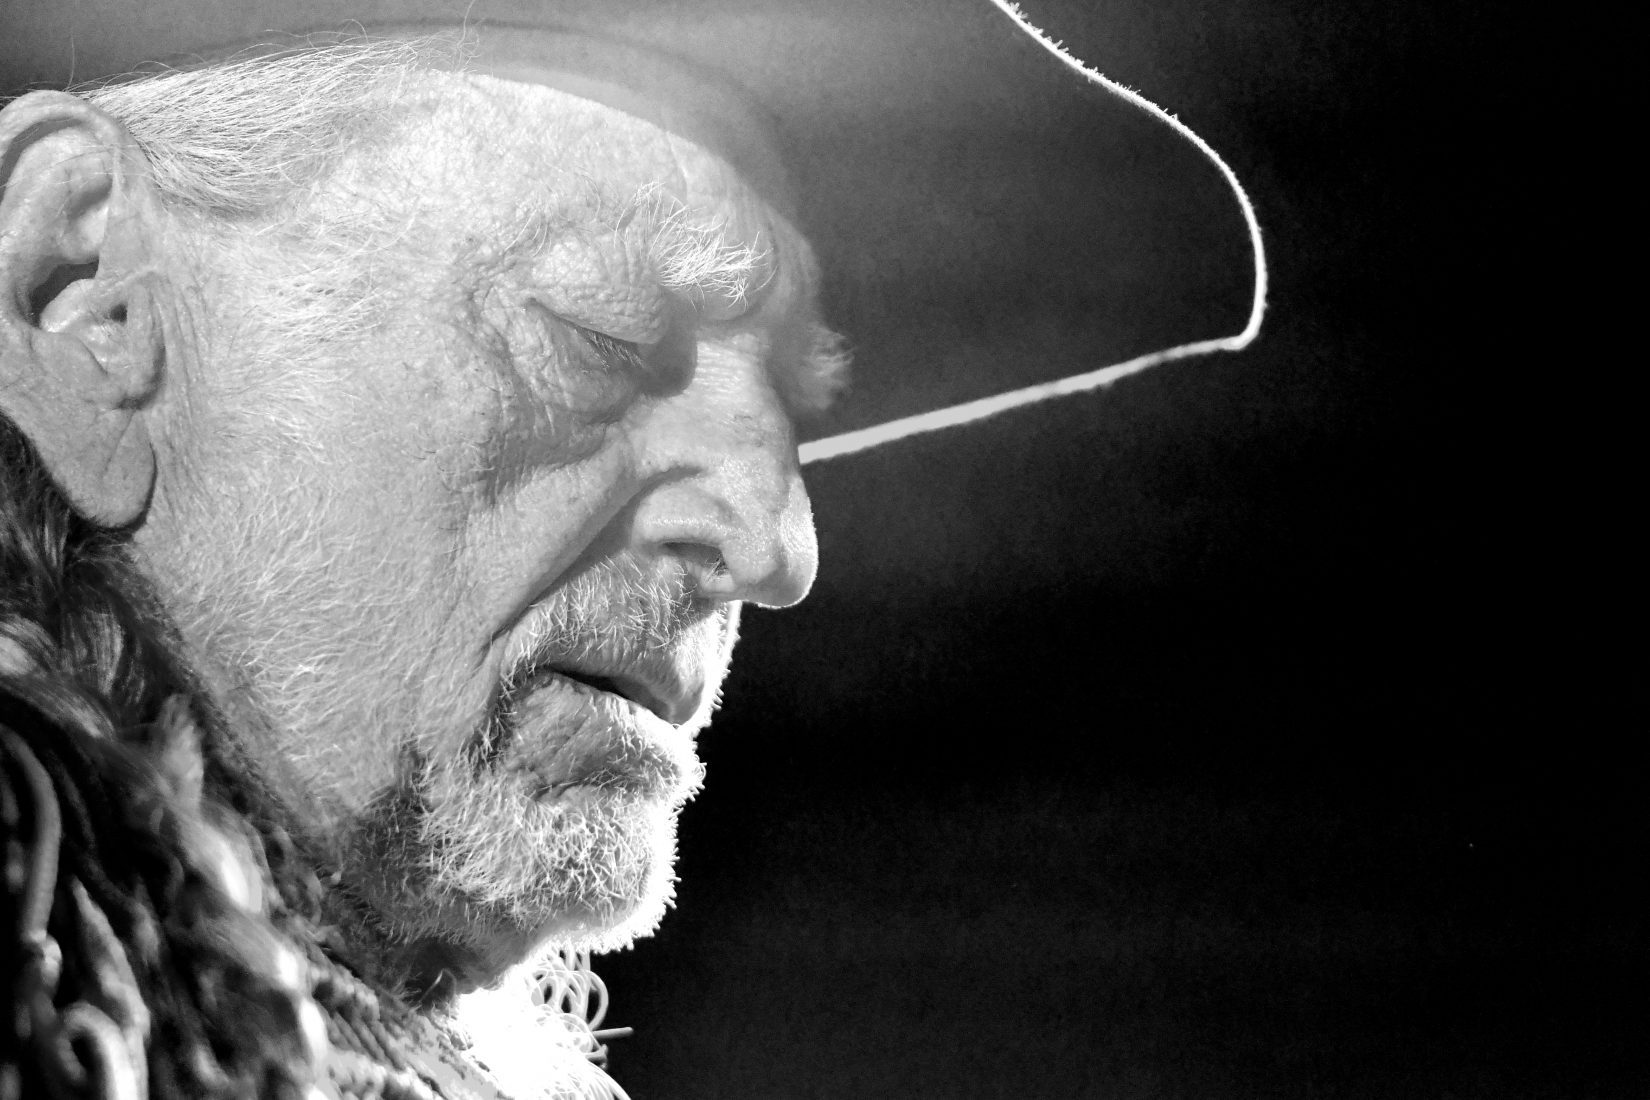 Country music legend and legalization activist Willie Nelson plays a show at Humphreys Concerts by the Bay in San Diego in October 2016. (Vince Chandler, The Denver Post)